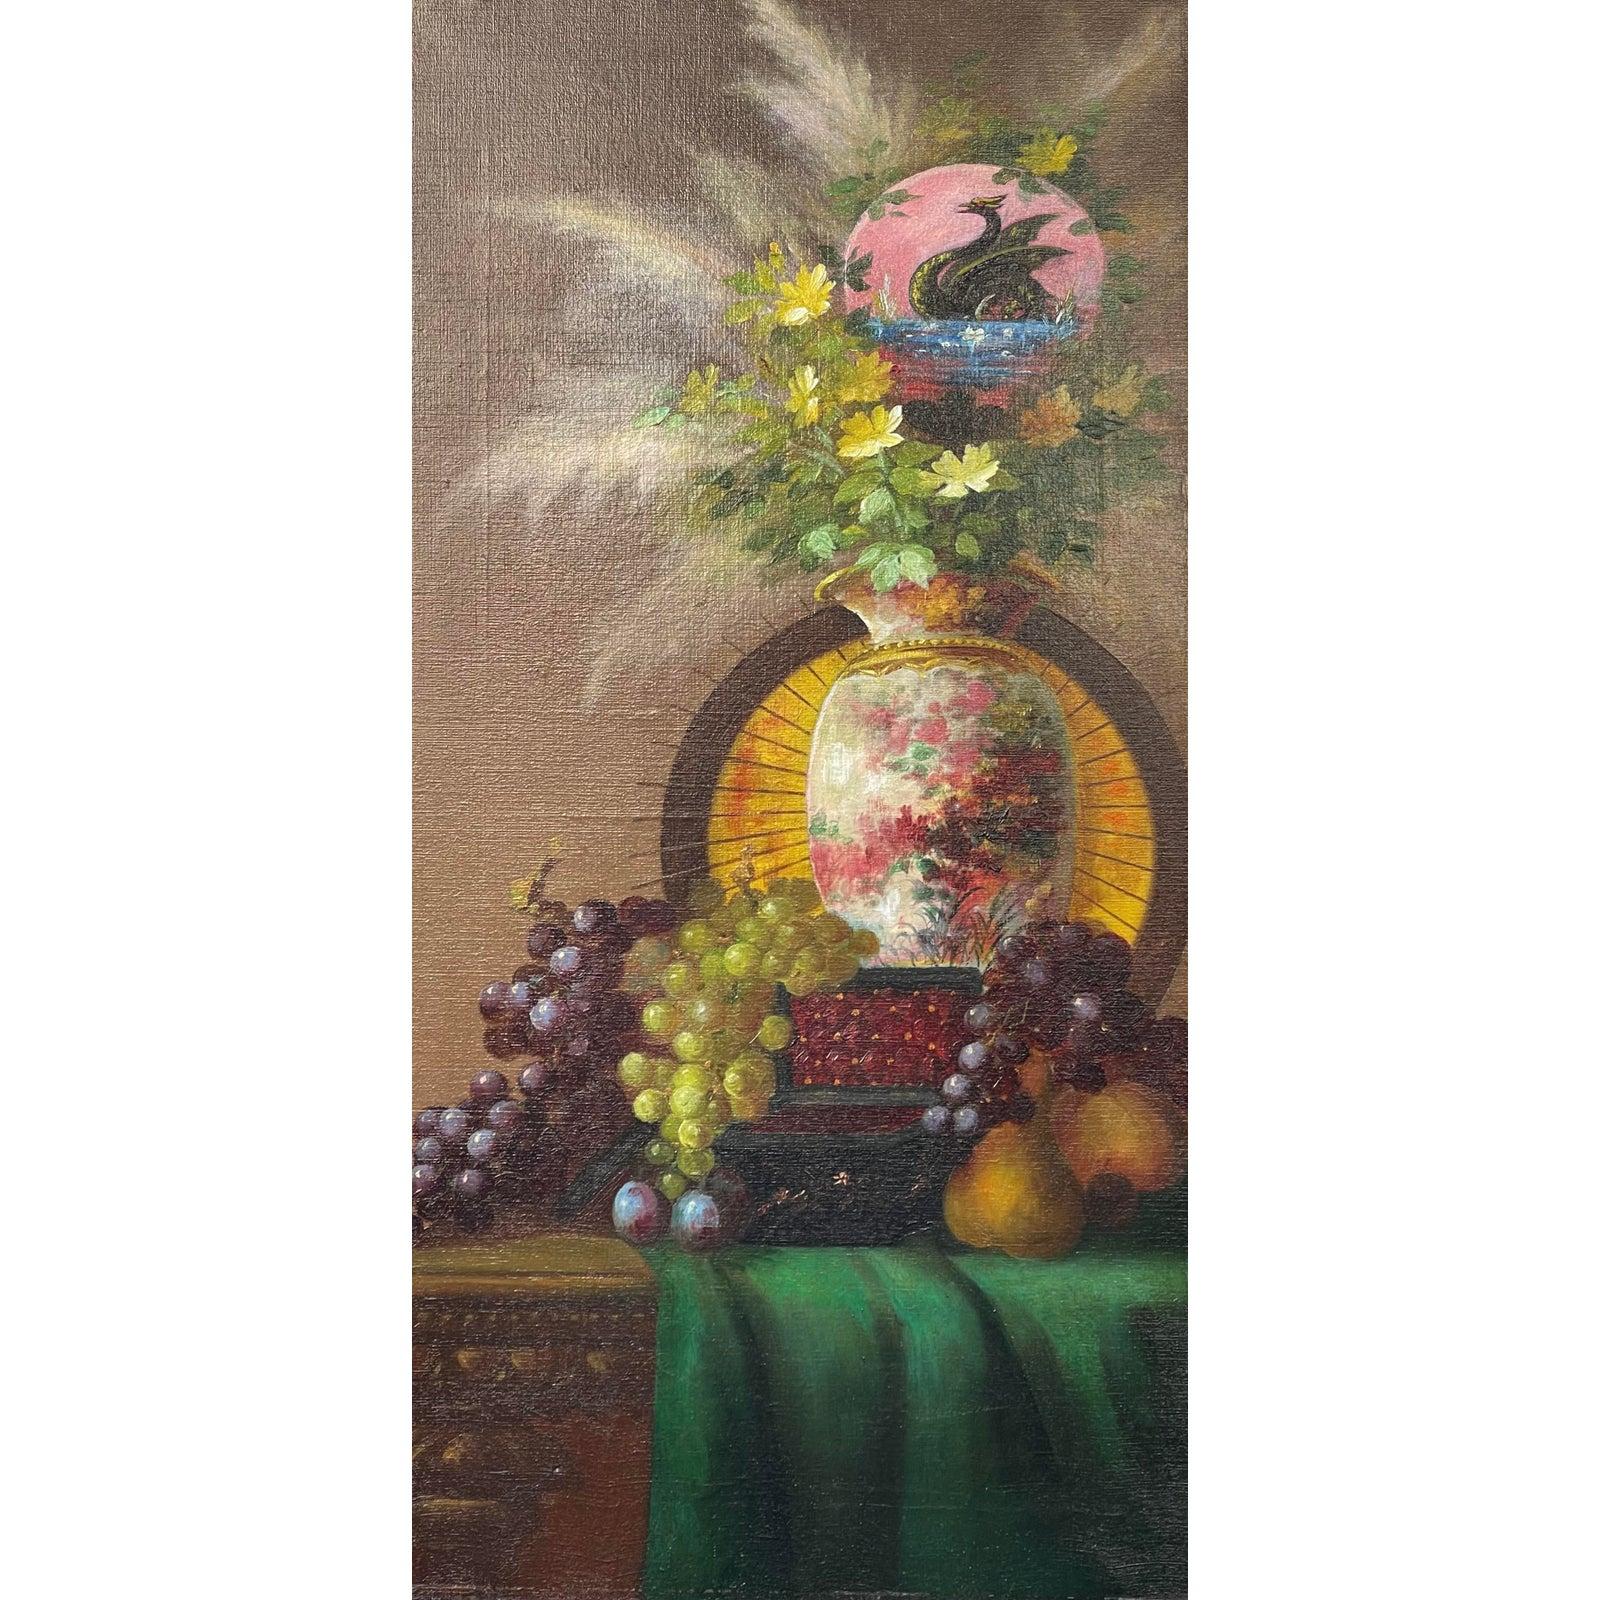 Pair of 19th C style Chinoiserie still life oil paintings. Each depicts a classic still life with flowers in a fine porcelain vase and an unusual Oriental dragon and a stork above.

Additional information:
Materials: Canvas, Giltwood, Oil